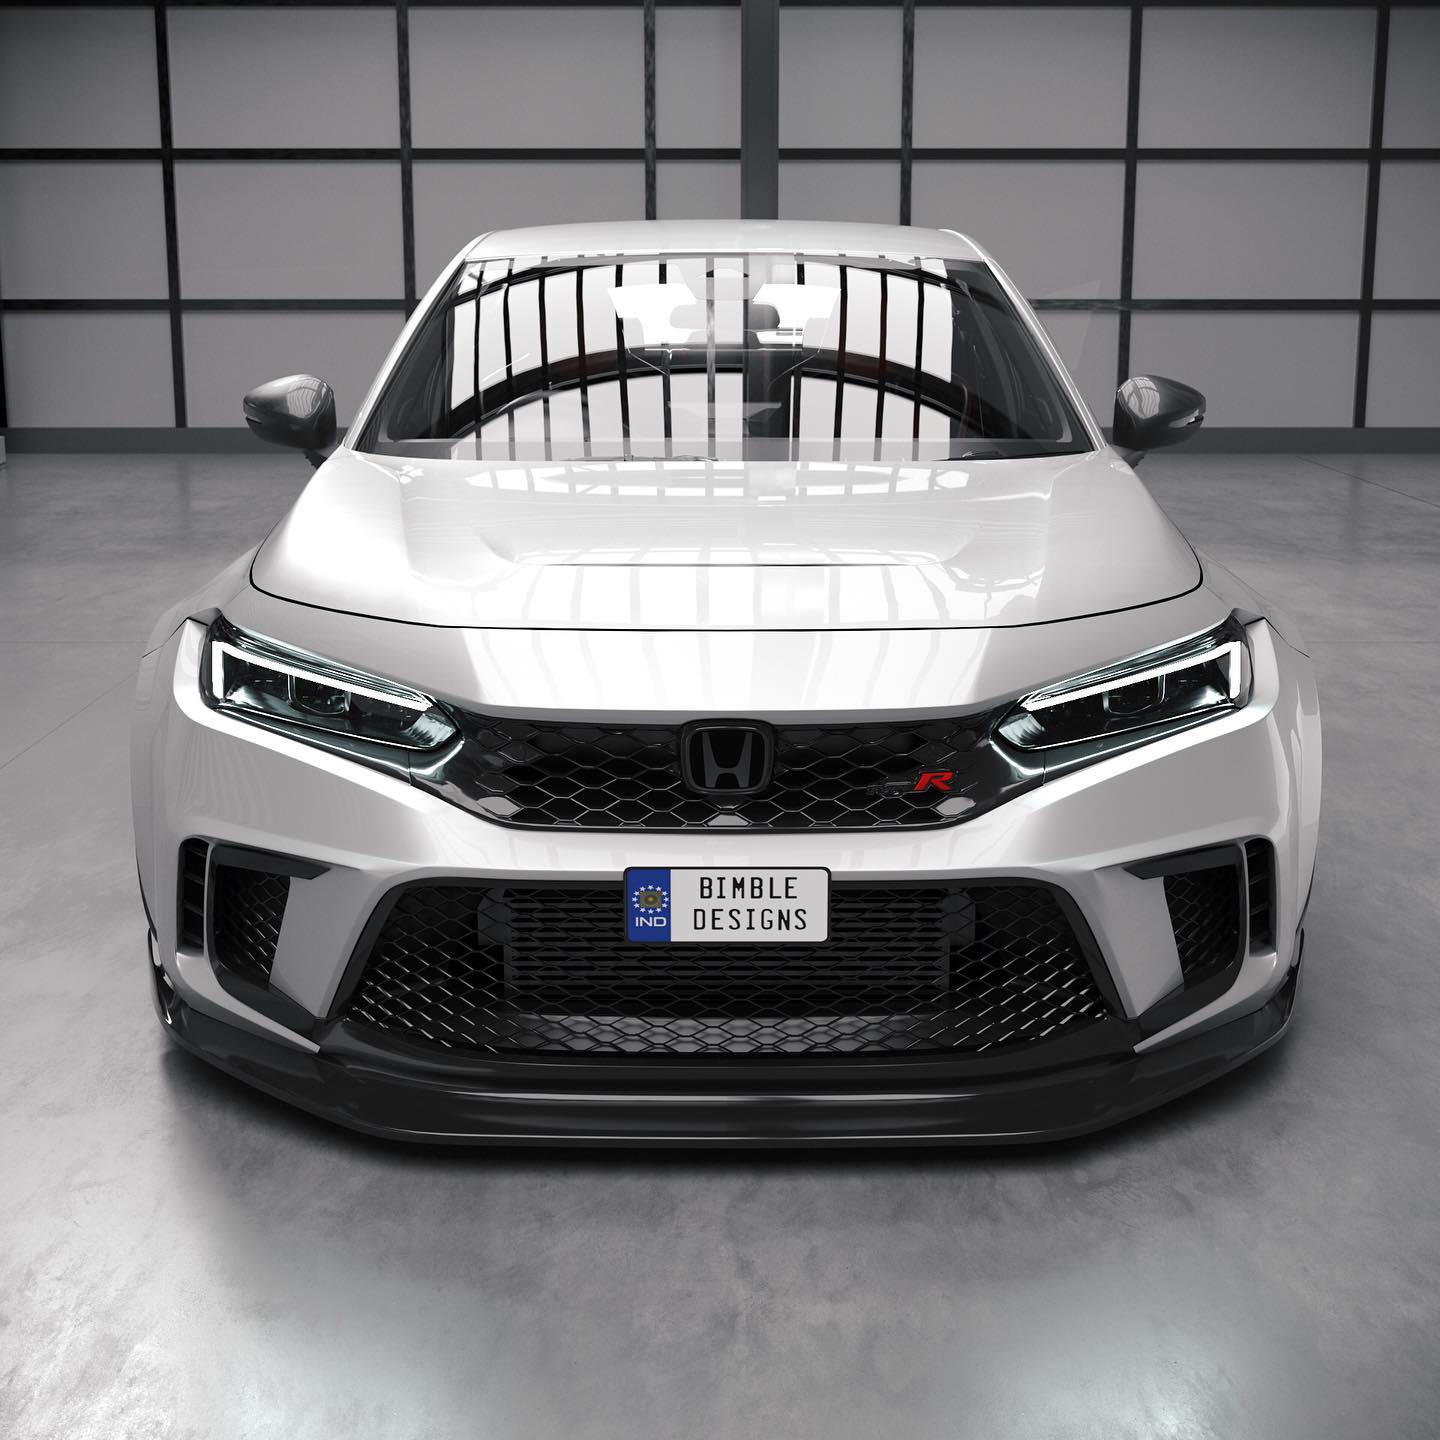 2023 Honda Civic Type R Is Already Getting a Virtual Facelift, Widebody